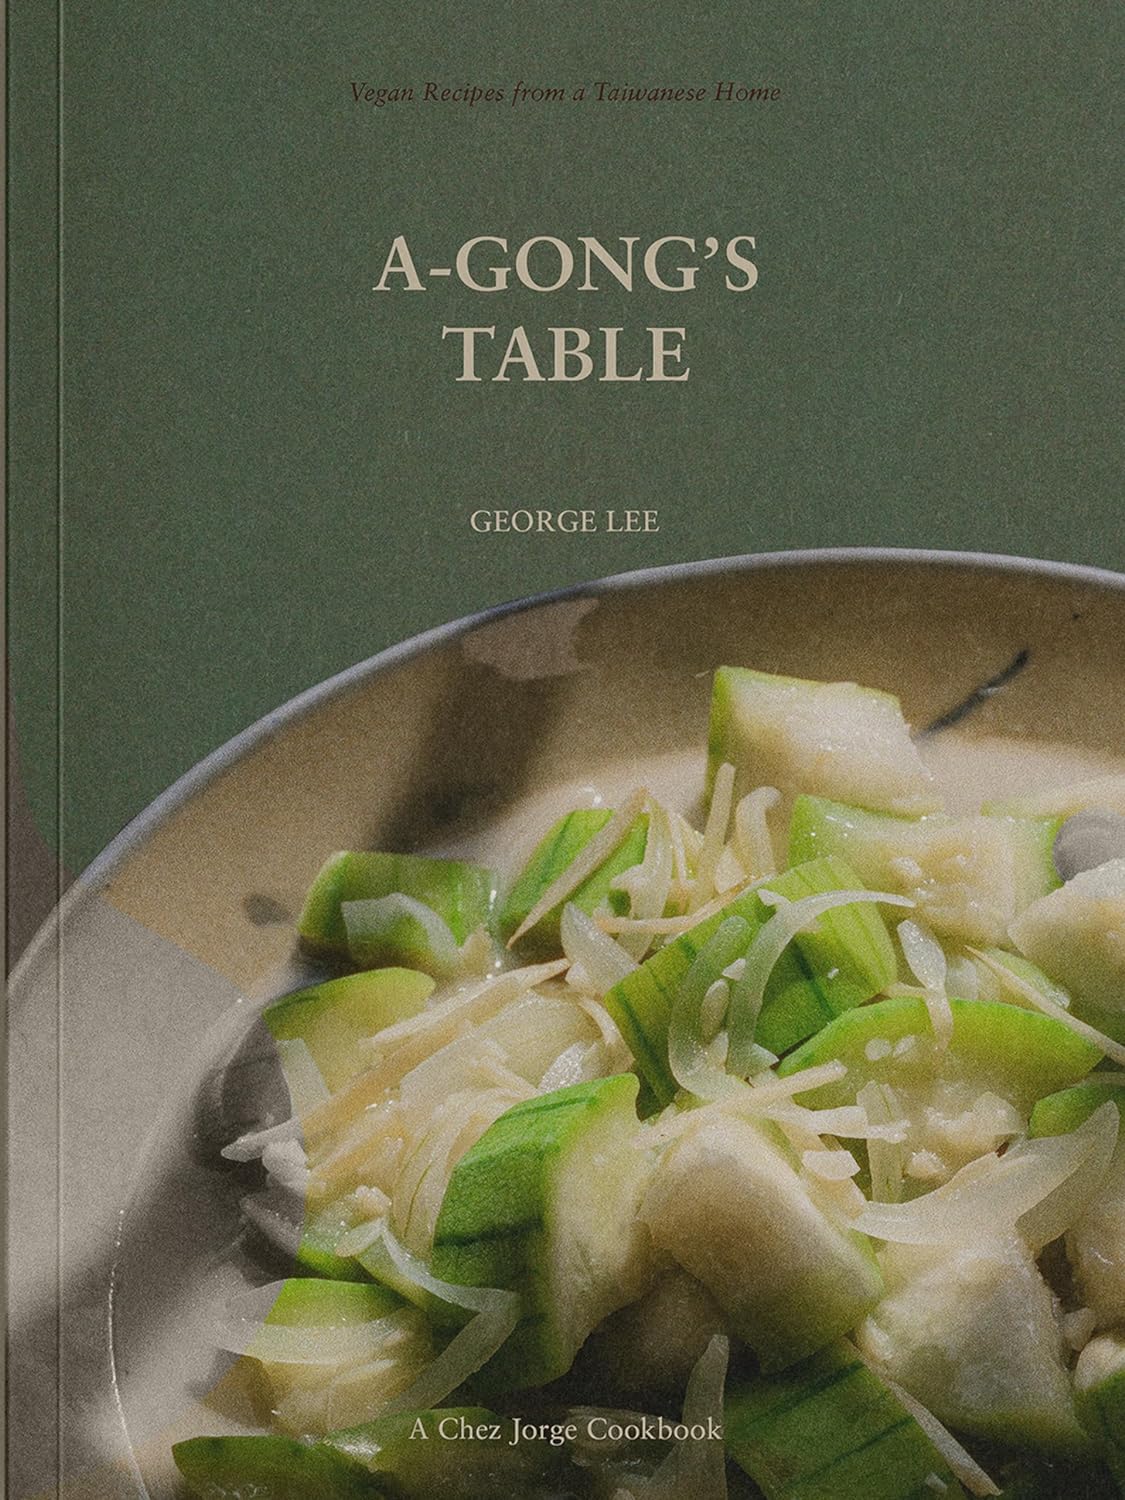 A-Gong's Table by George Lee